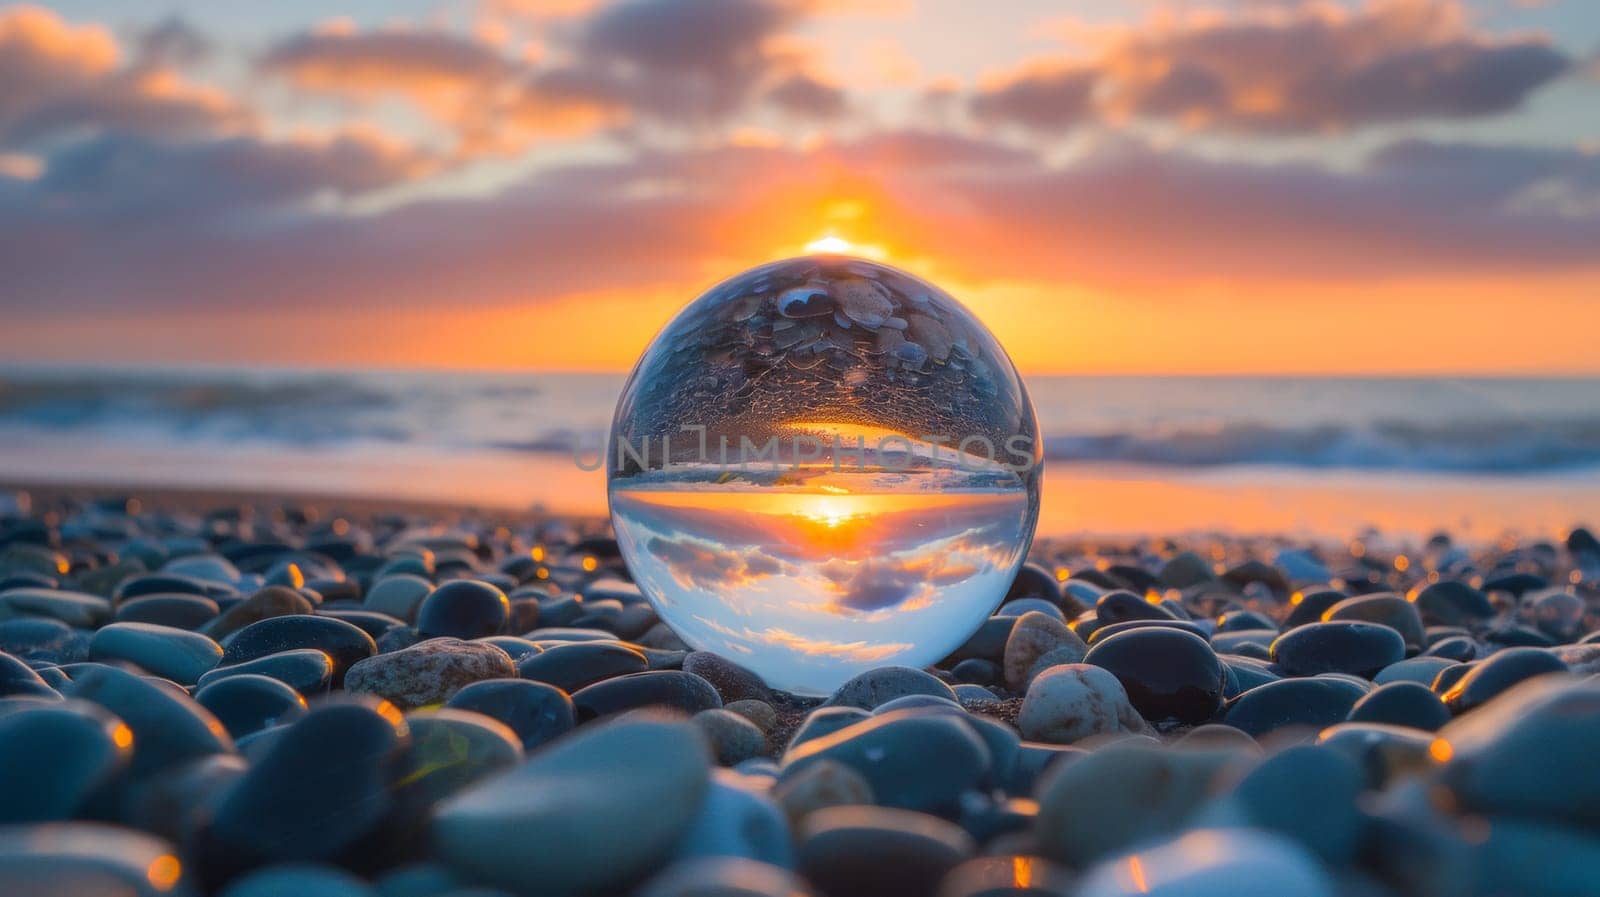 A glass ball sitting on a beach with the sun setting in front of it